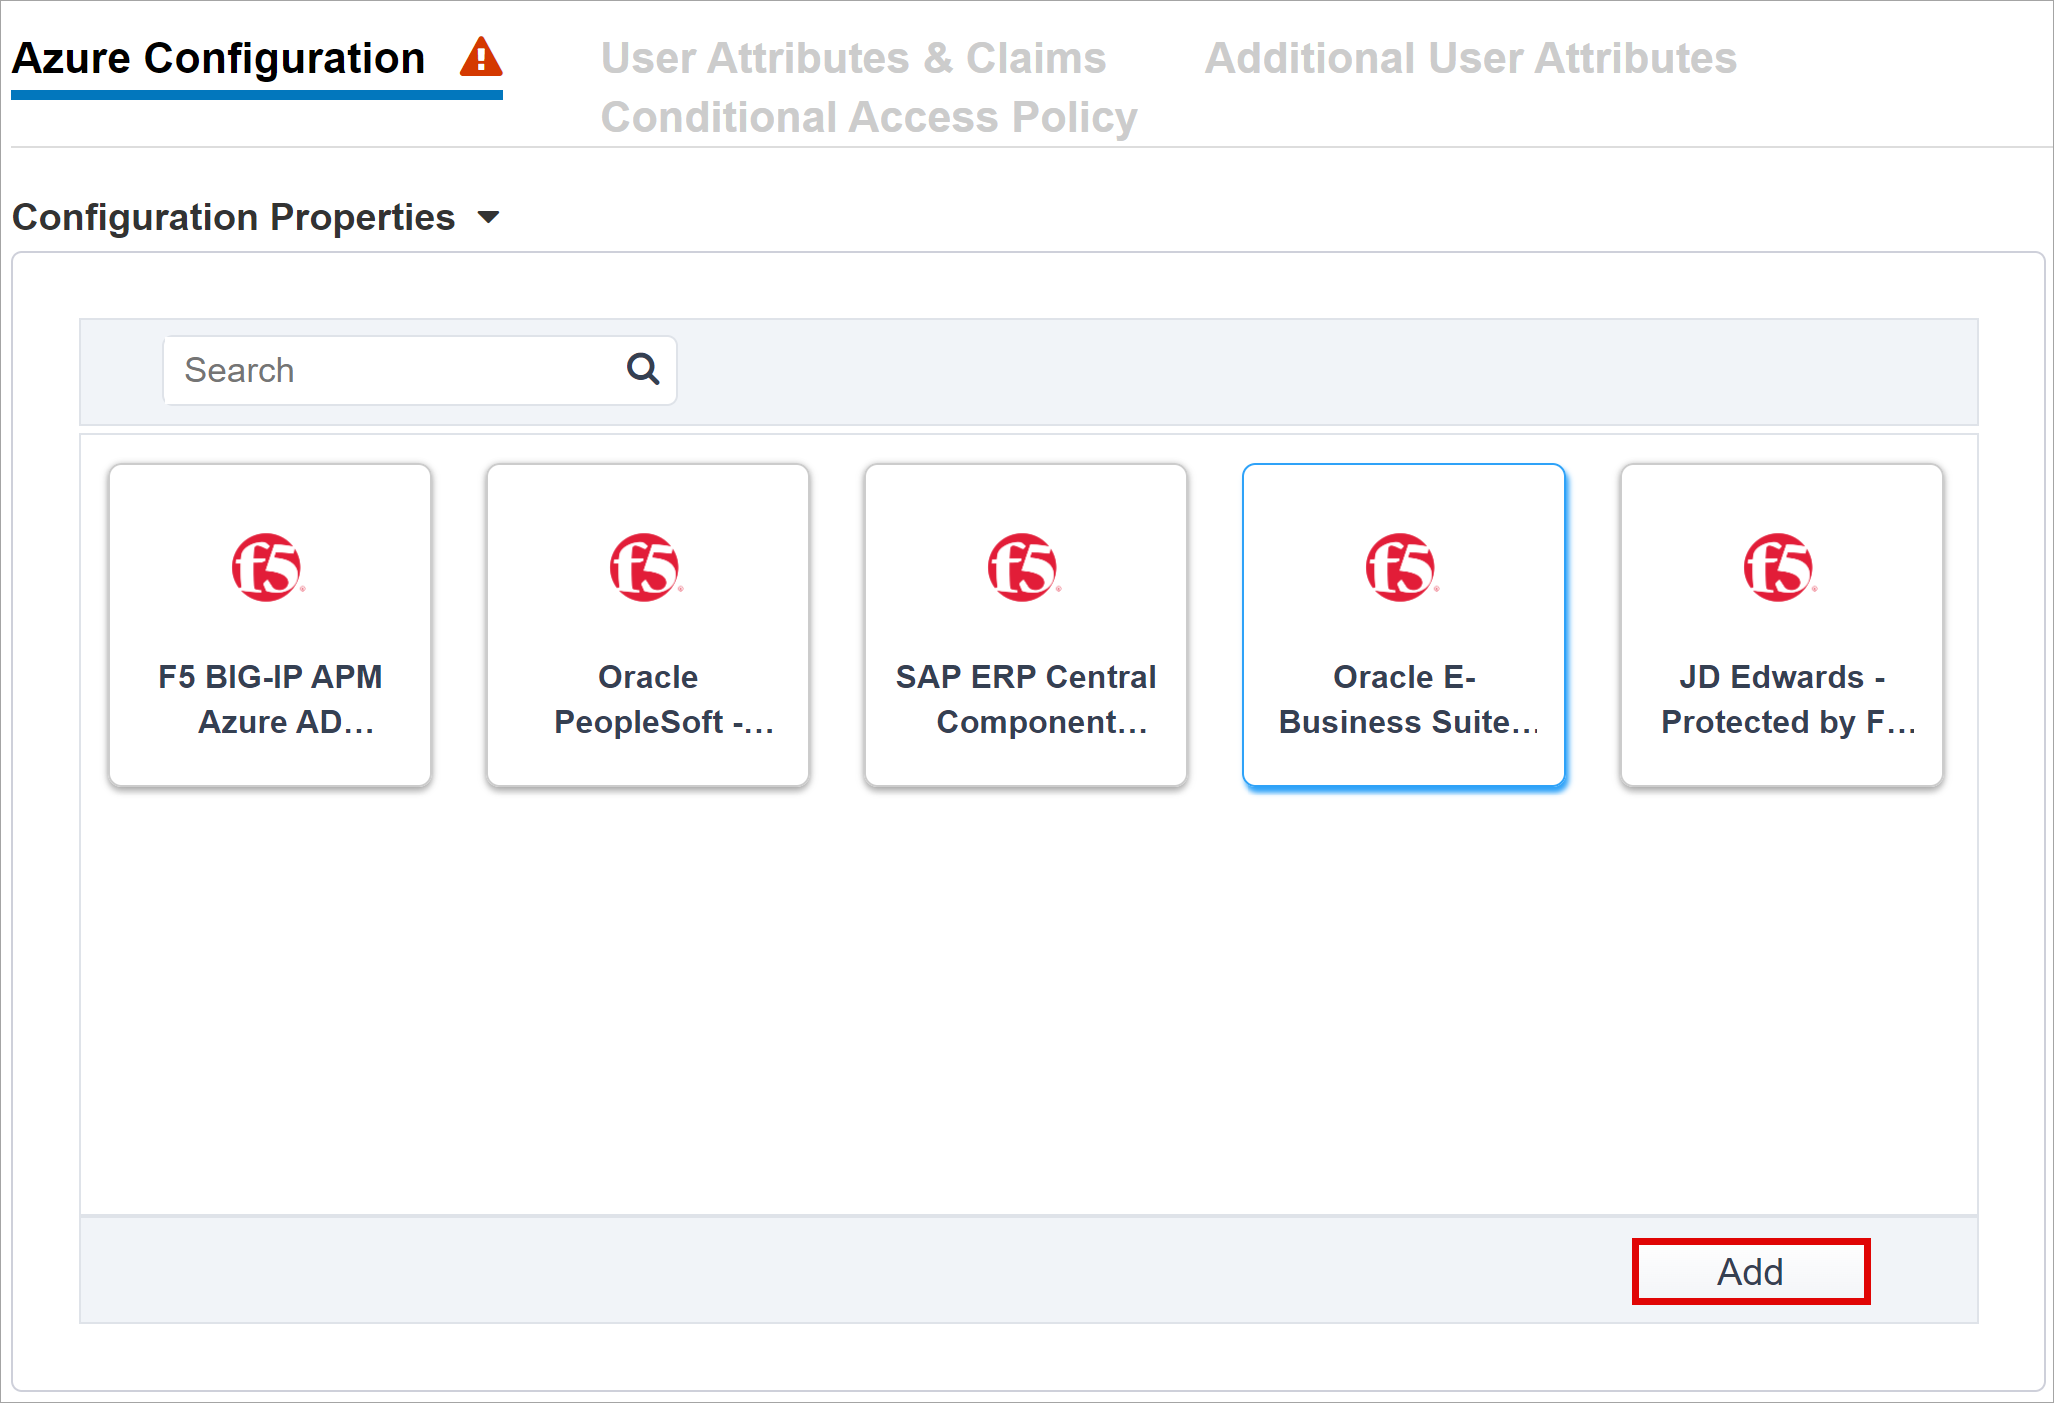 Screenshot of the Oracle E-Business Suite option under Azure Configuration.